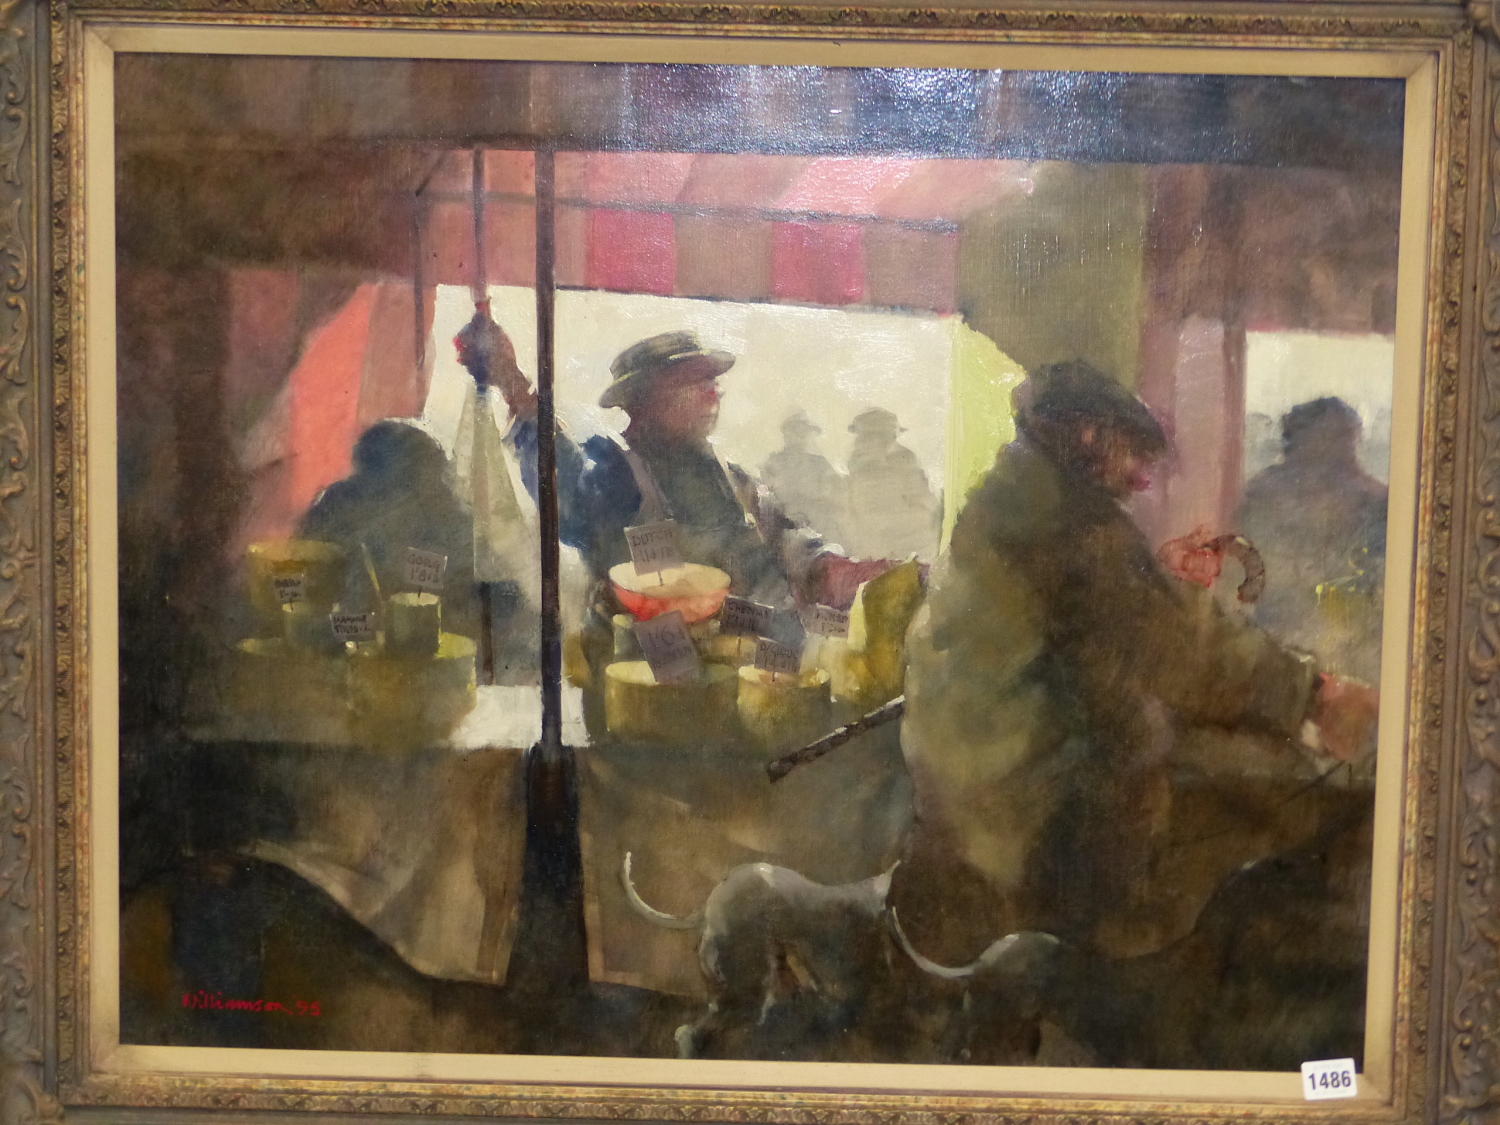 LAWRIE WILLIAMSON (1932-2017) ARR. MARKET DAY, SIGNED, OIL ON CANVAS, GALLERY LABEL VERSO. 61 x - Image 5 of 9